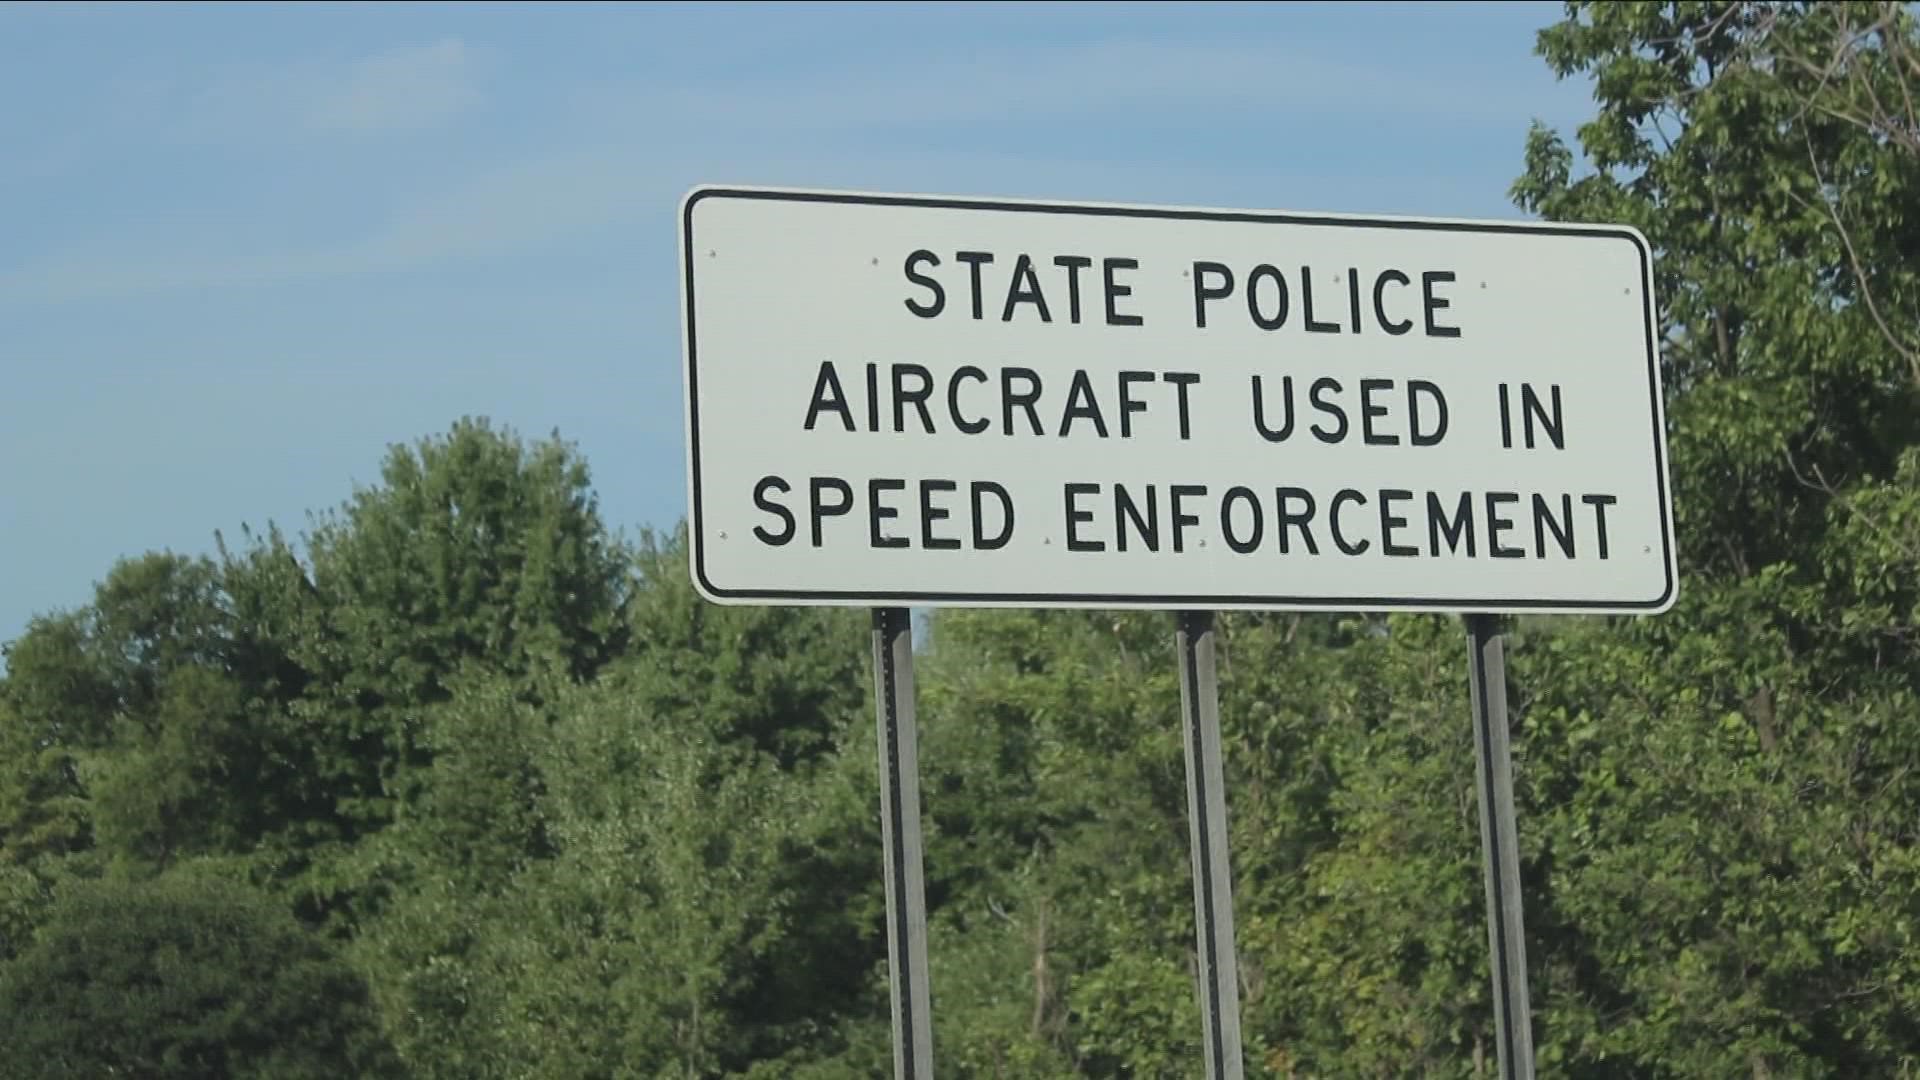 There are over a dozen signs on the New York State Thruway and DOT maintained roads promoting aircraft speed enforcement, yet the NYS Police no longer do it.